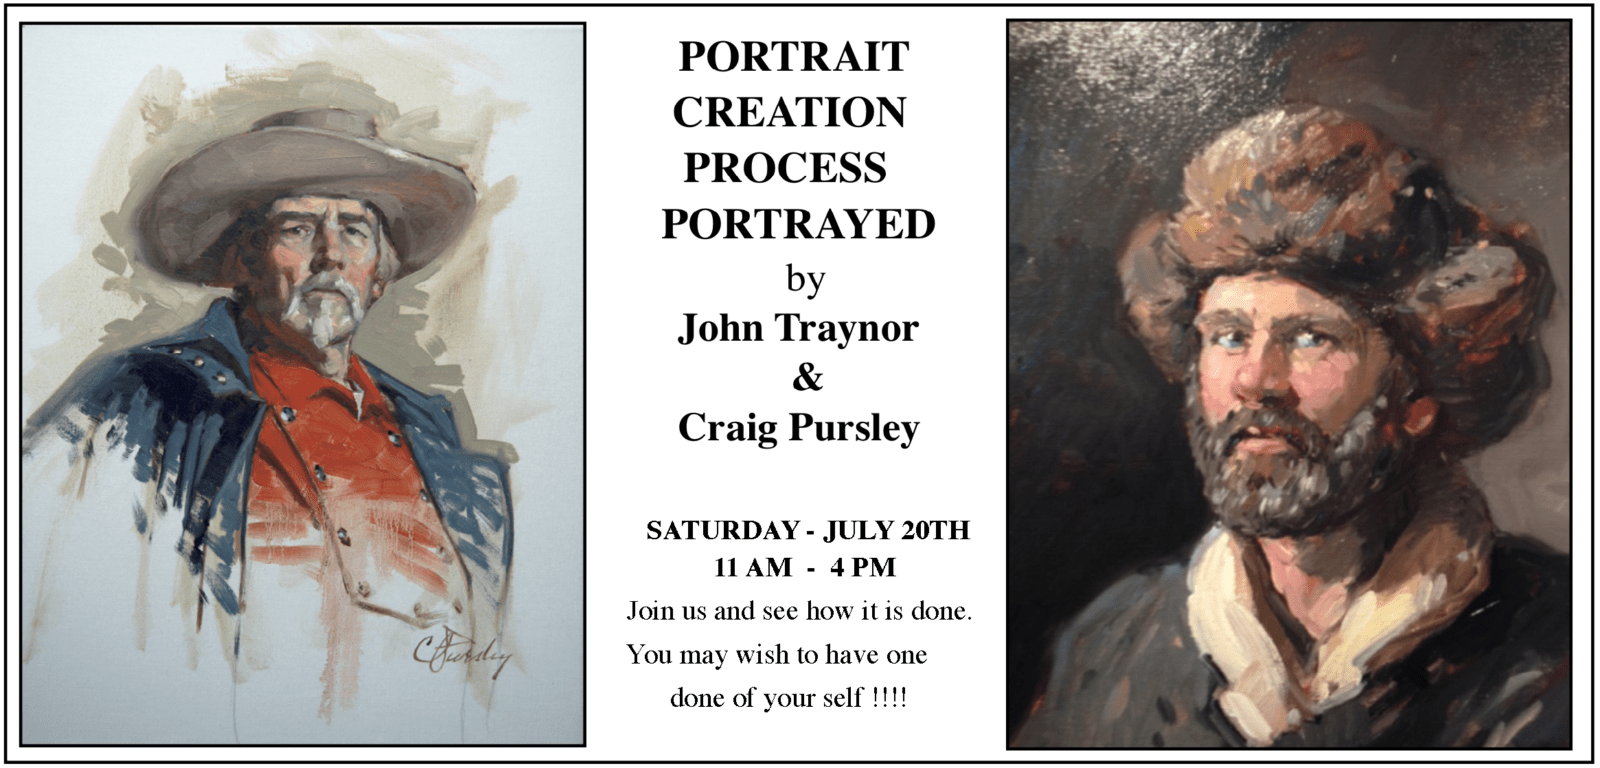 Portrait creation process by john taylor and greg pearcy.